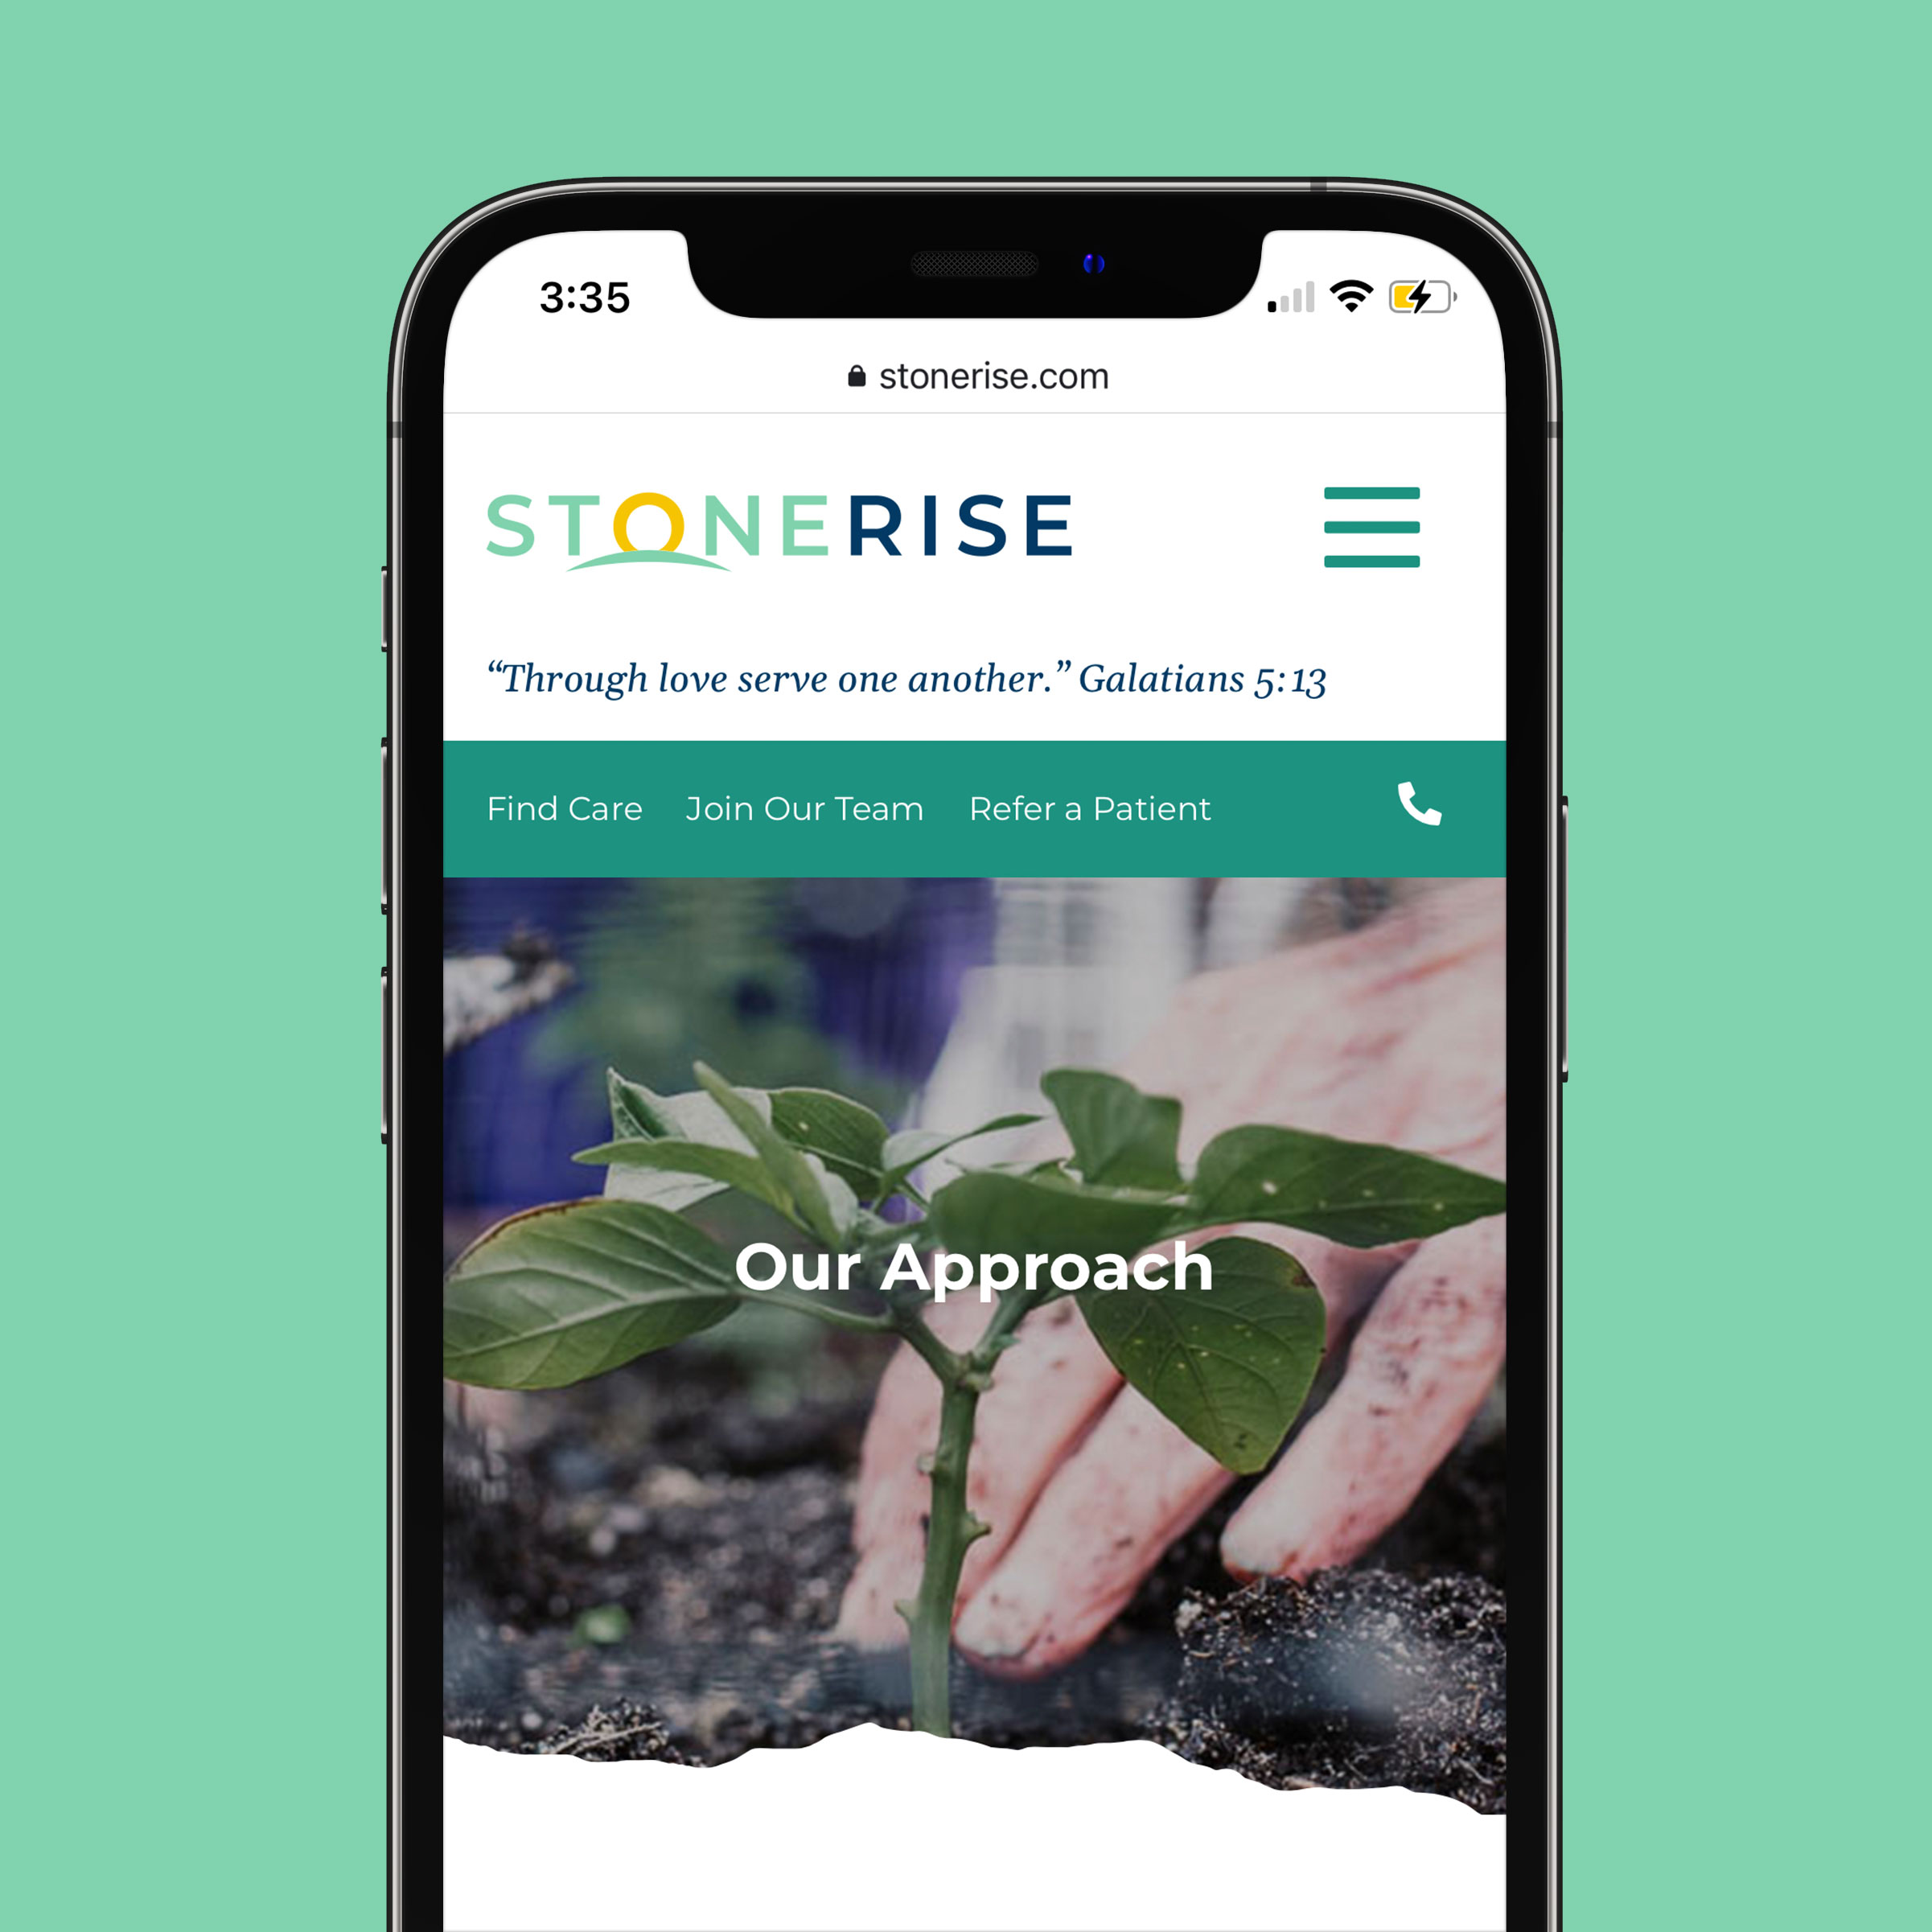 Stonerise website mockup in an iPhone